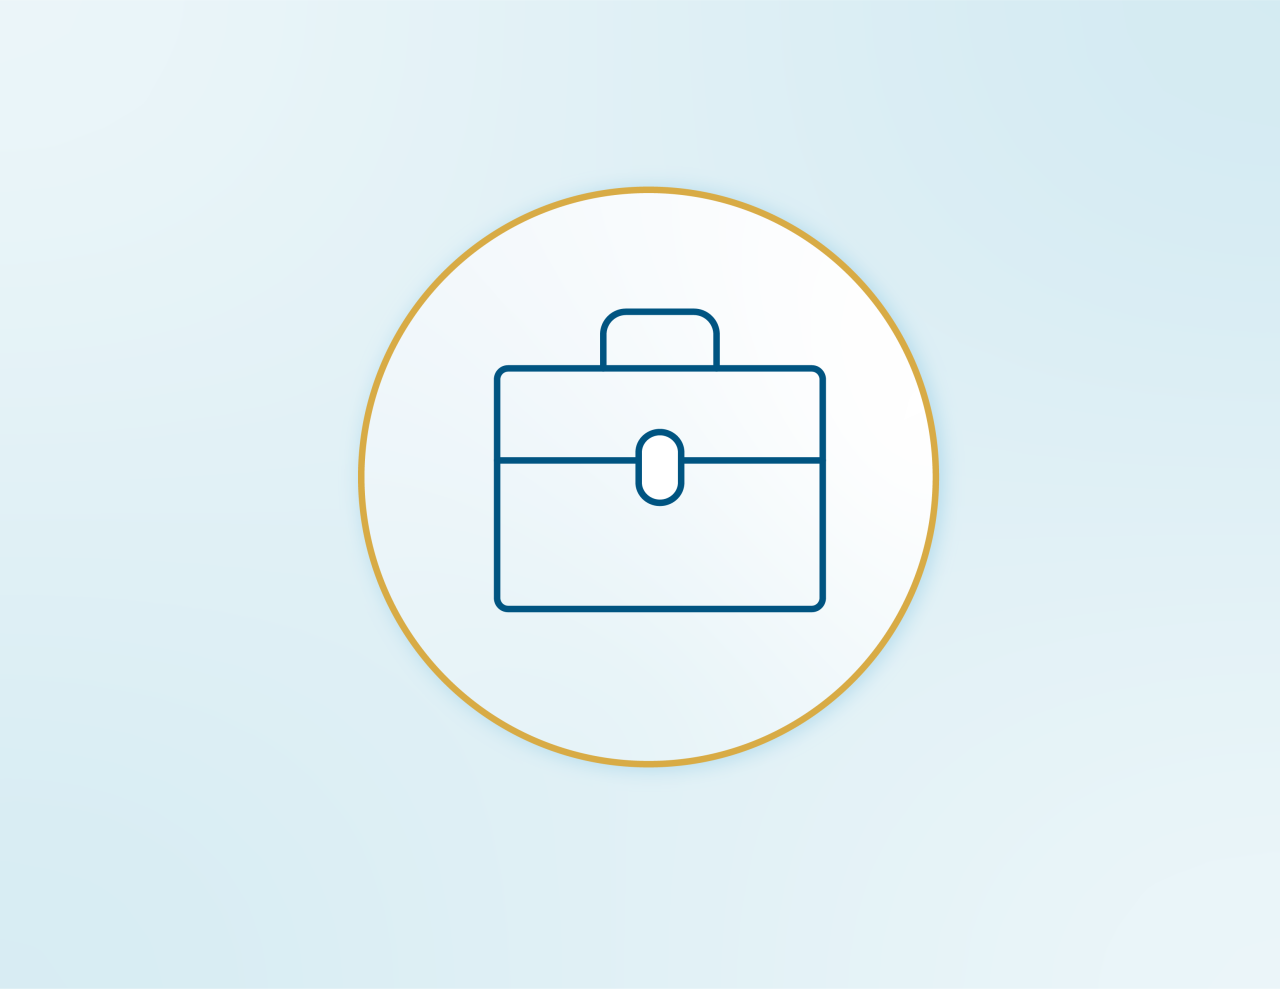 briefcase icon on light blue background